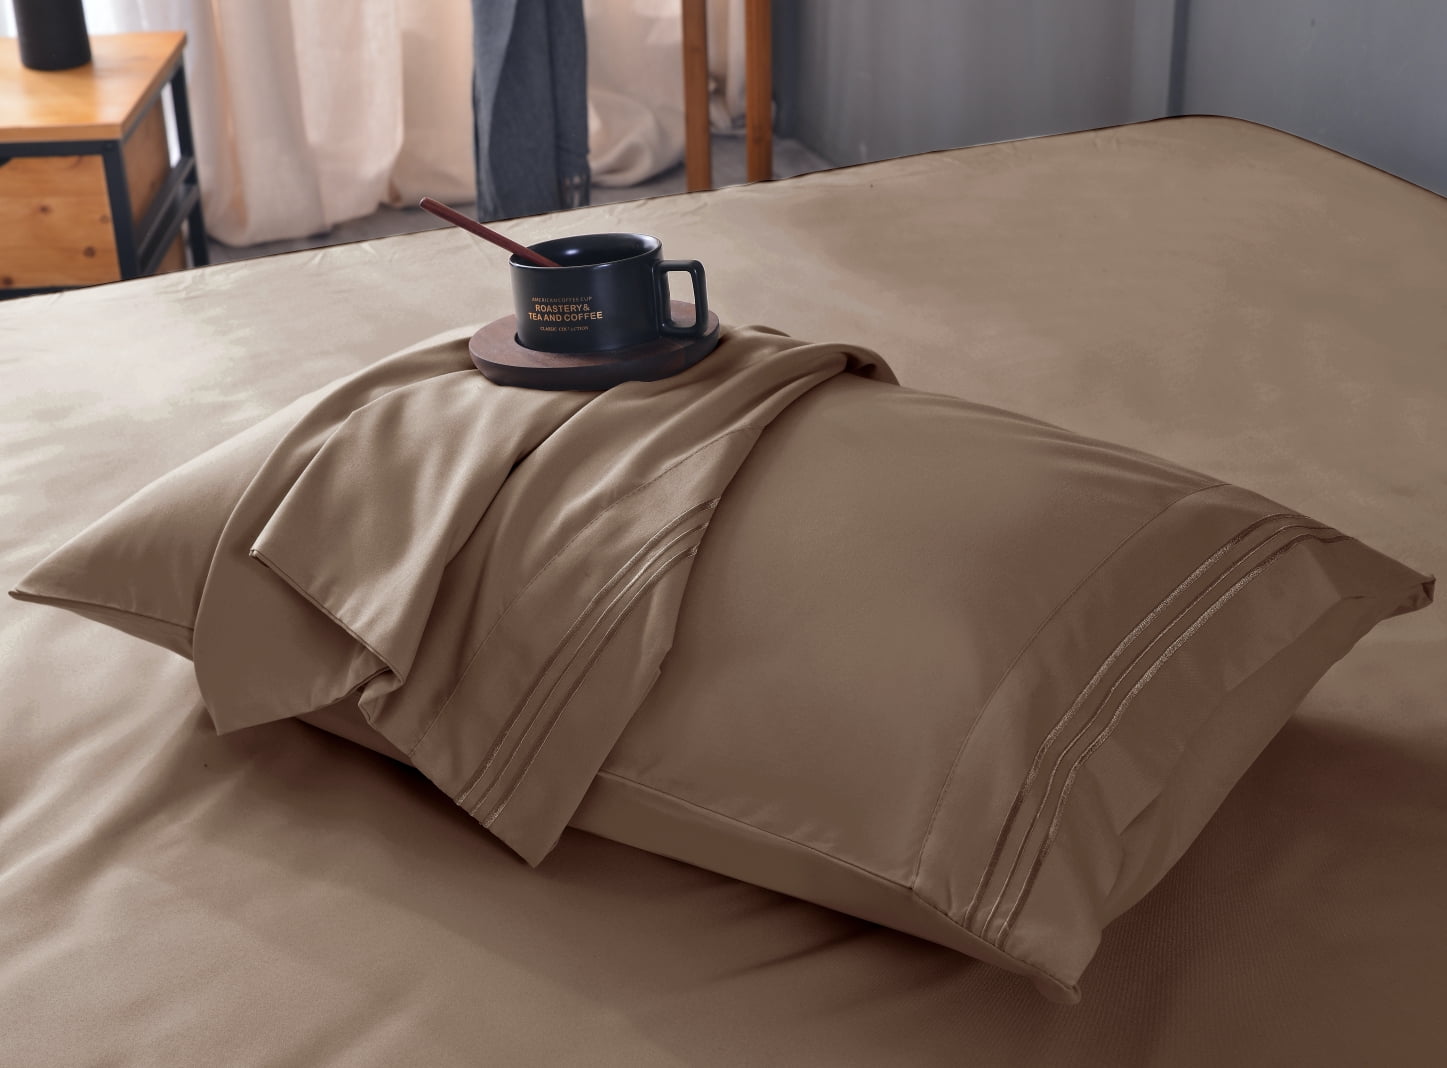 Details about   Magic Sheets 800 Thread Count 4 Piece Bed Sheet Set 100% Egyptian Cotton with 21 